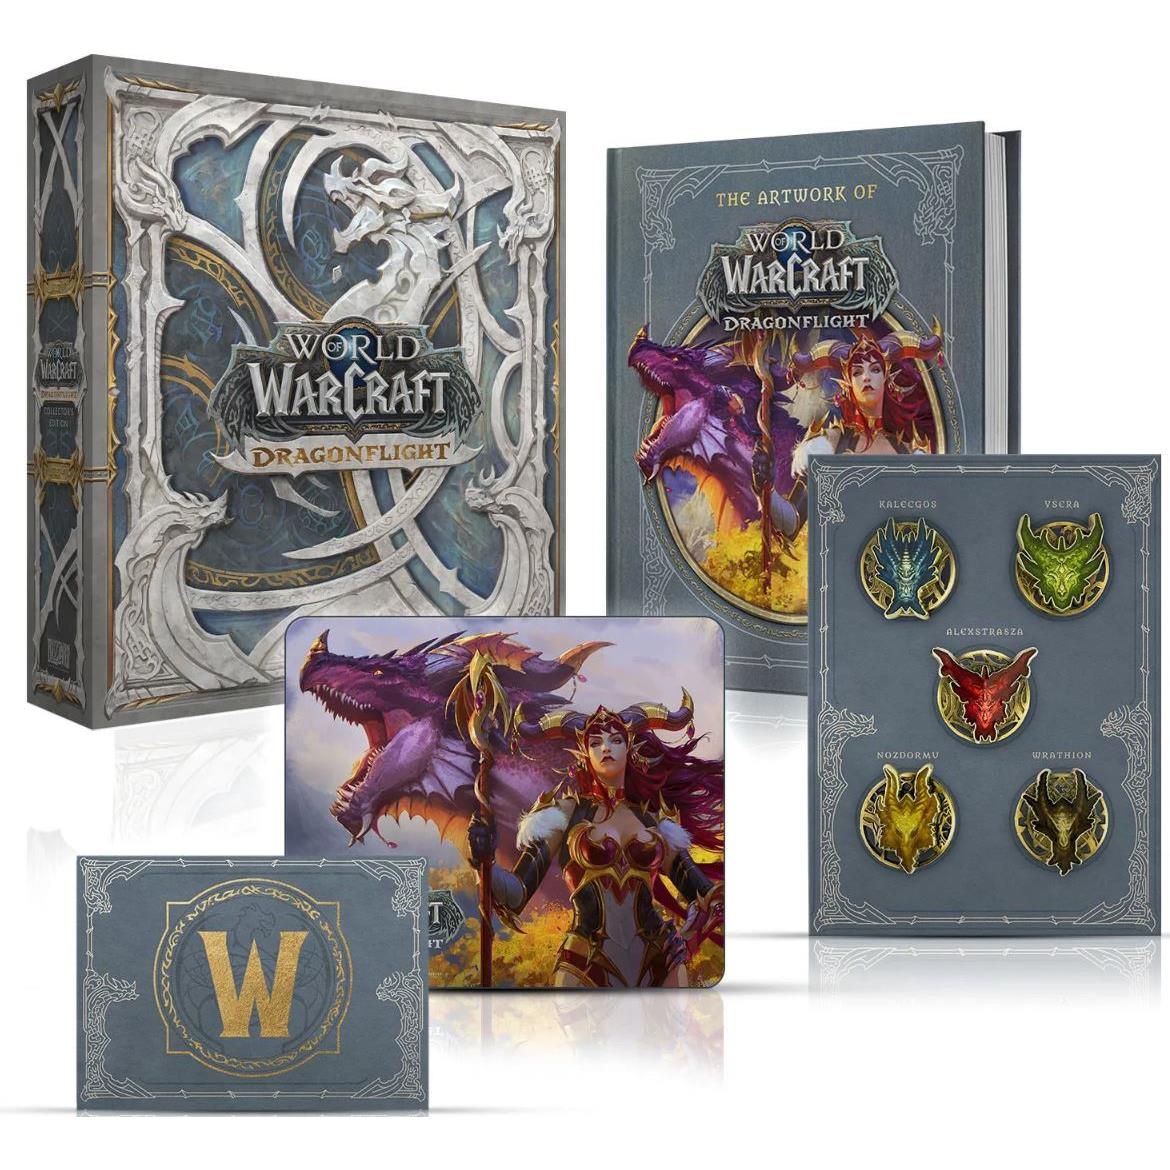 world of warcraft dragonflight epic edition collector's set